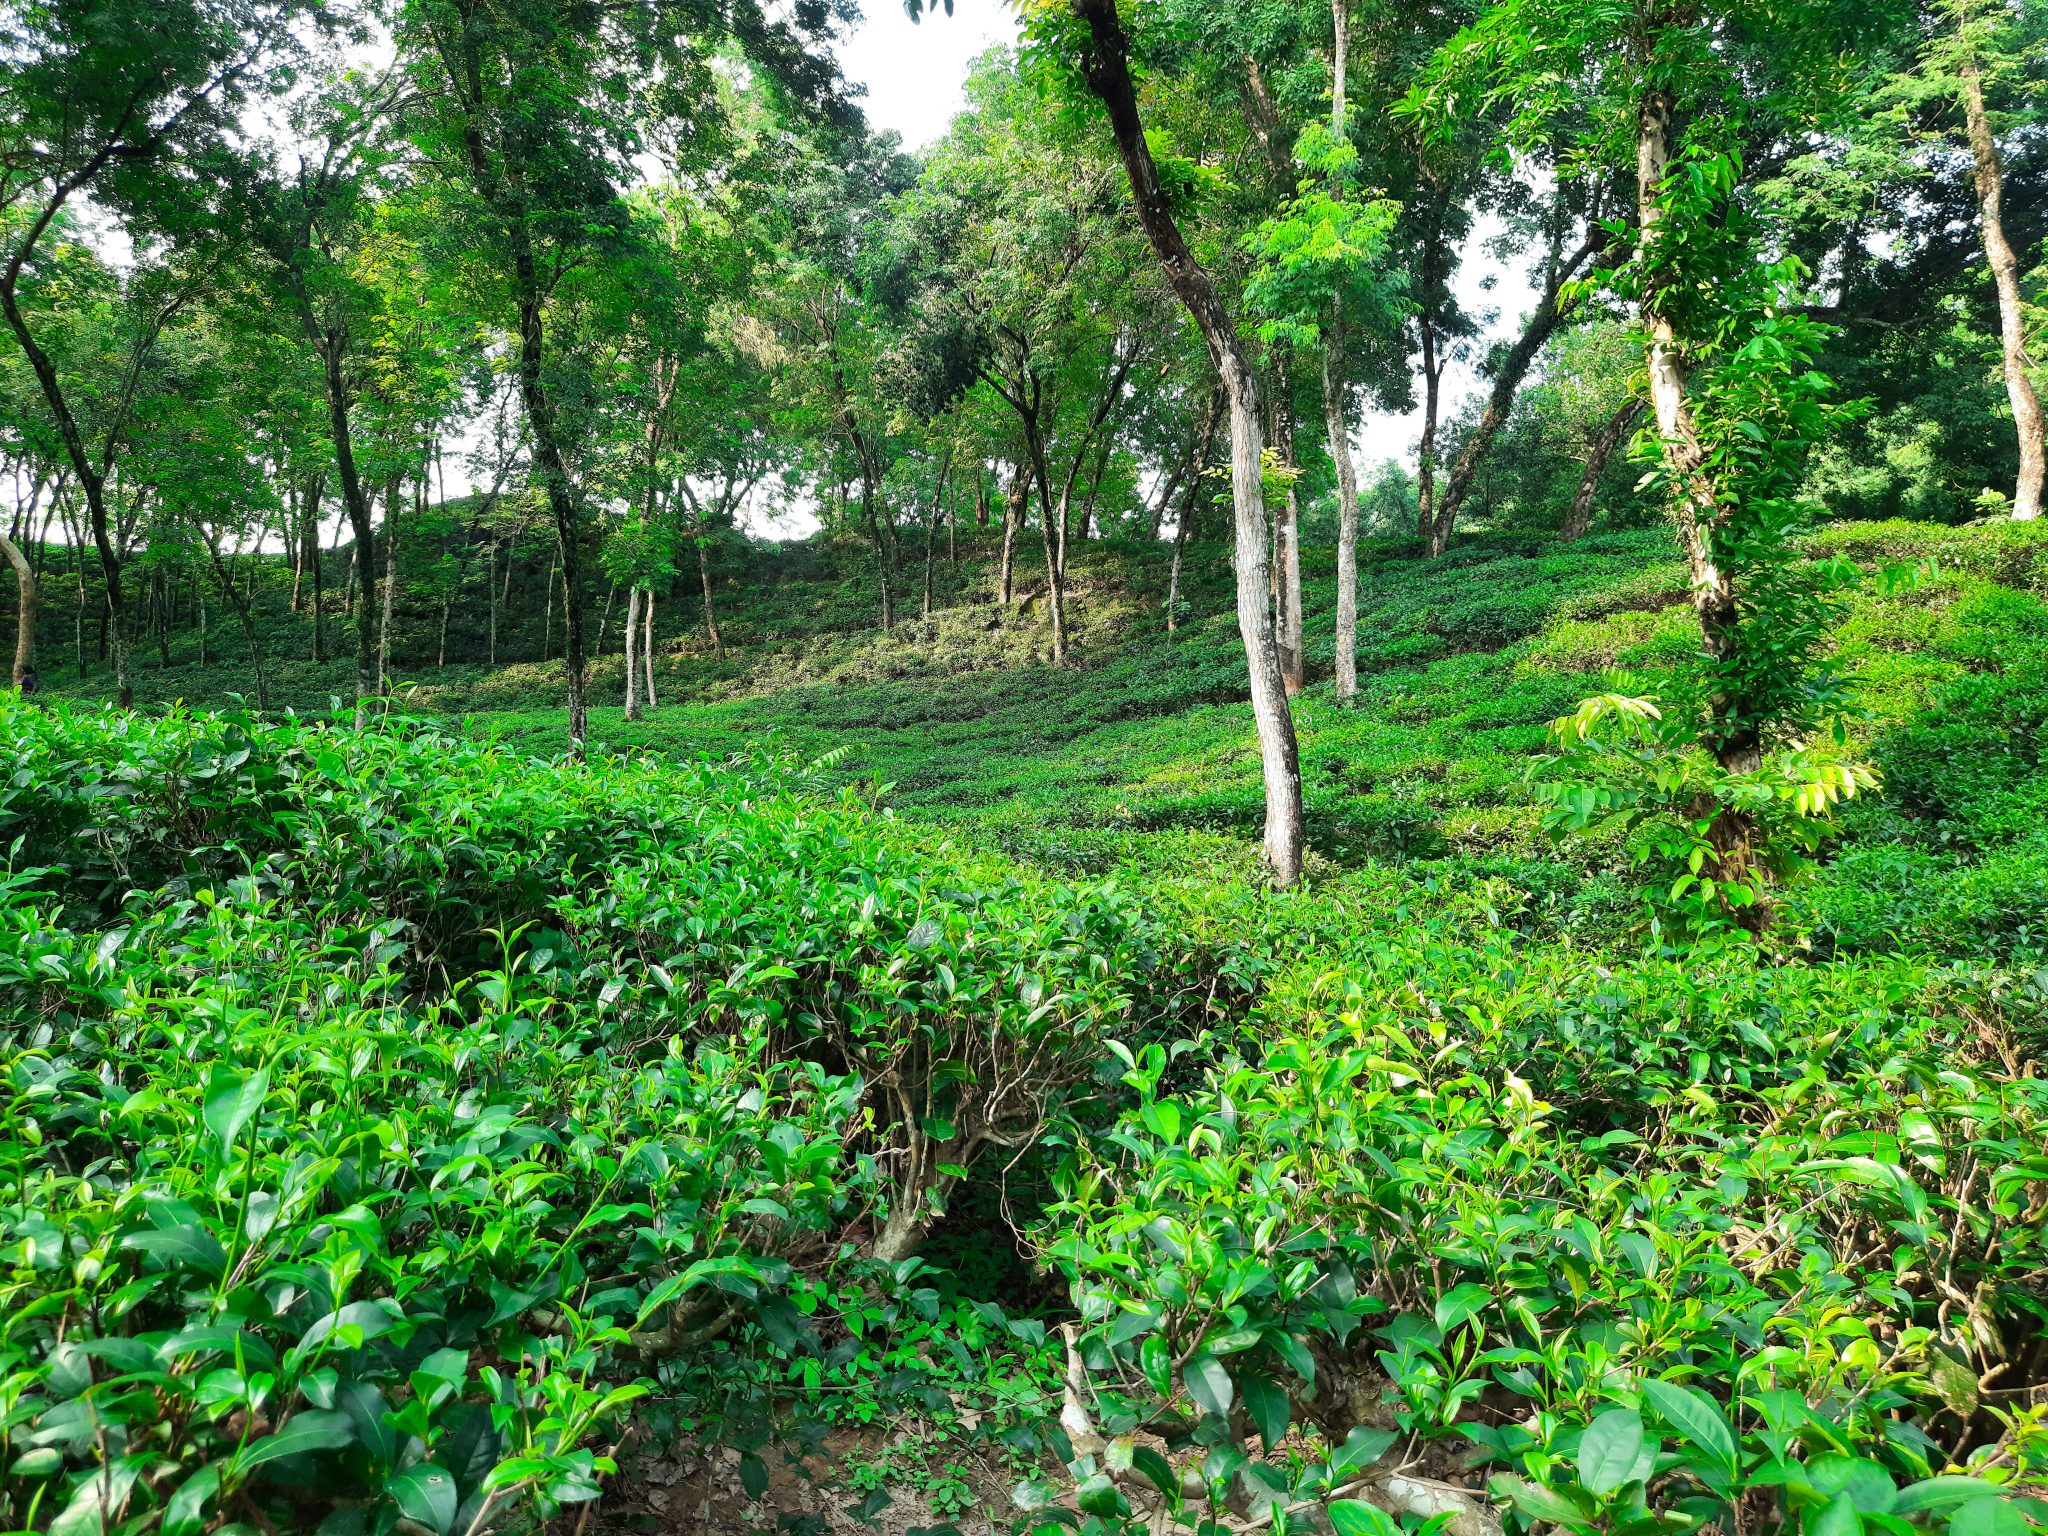 A wonderful snap of a tea garden in the heart of Sylhet, where a symphony of shade trees are seen to be providing partial shade to the tea plants, crucial for cultivating exquisite tea leaves.